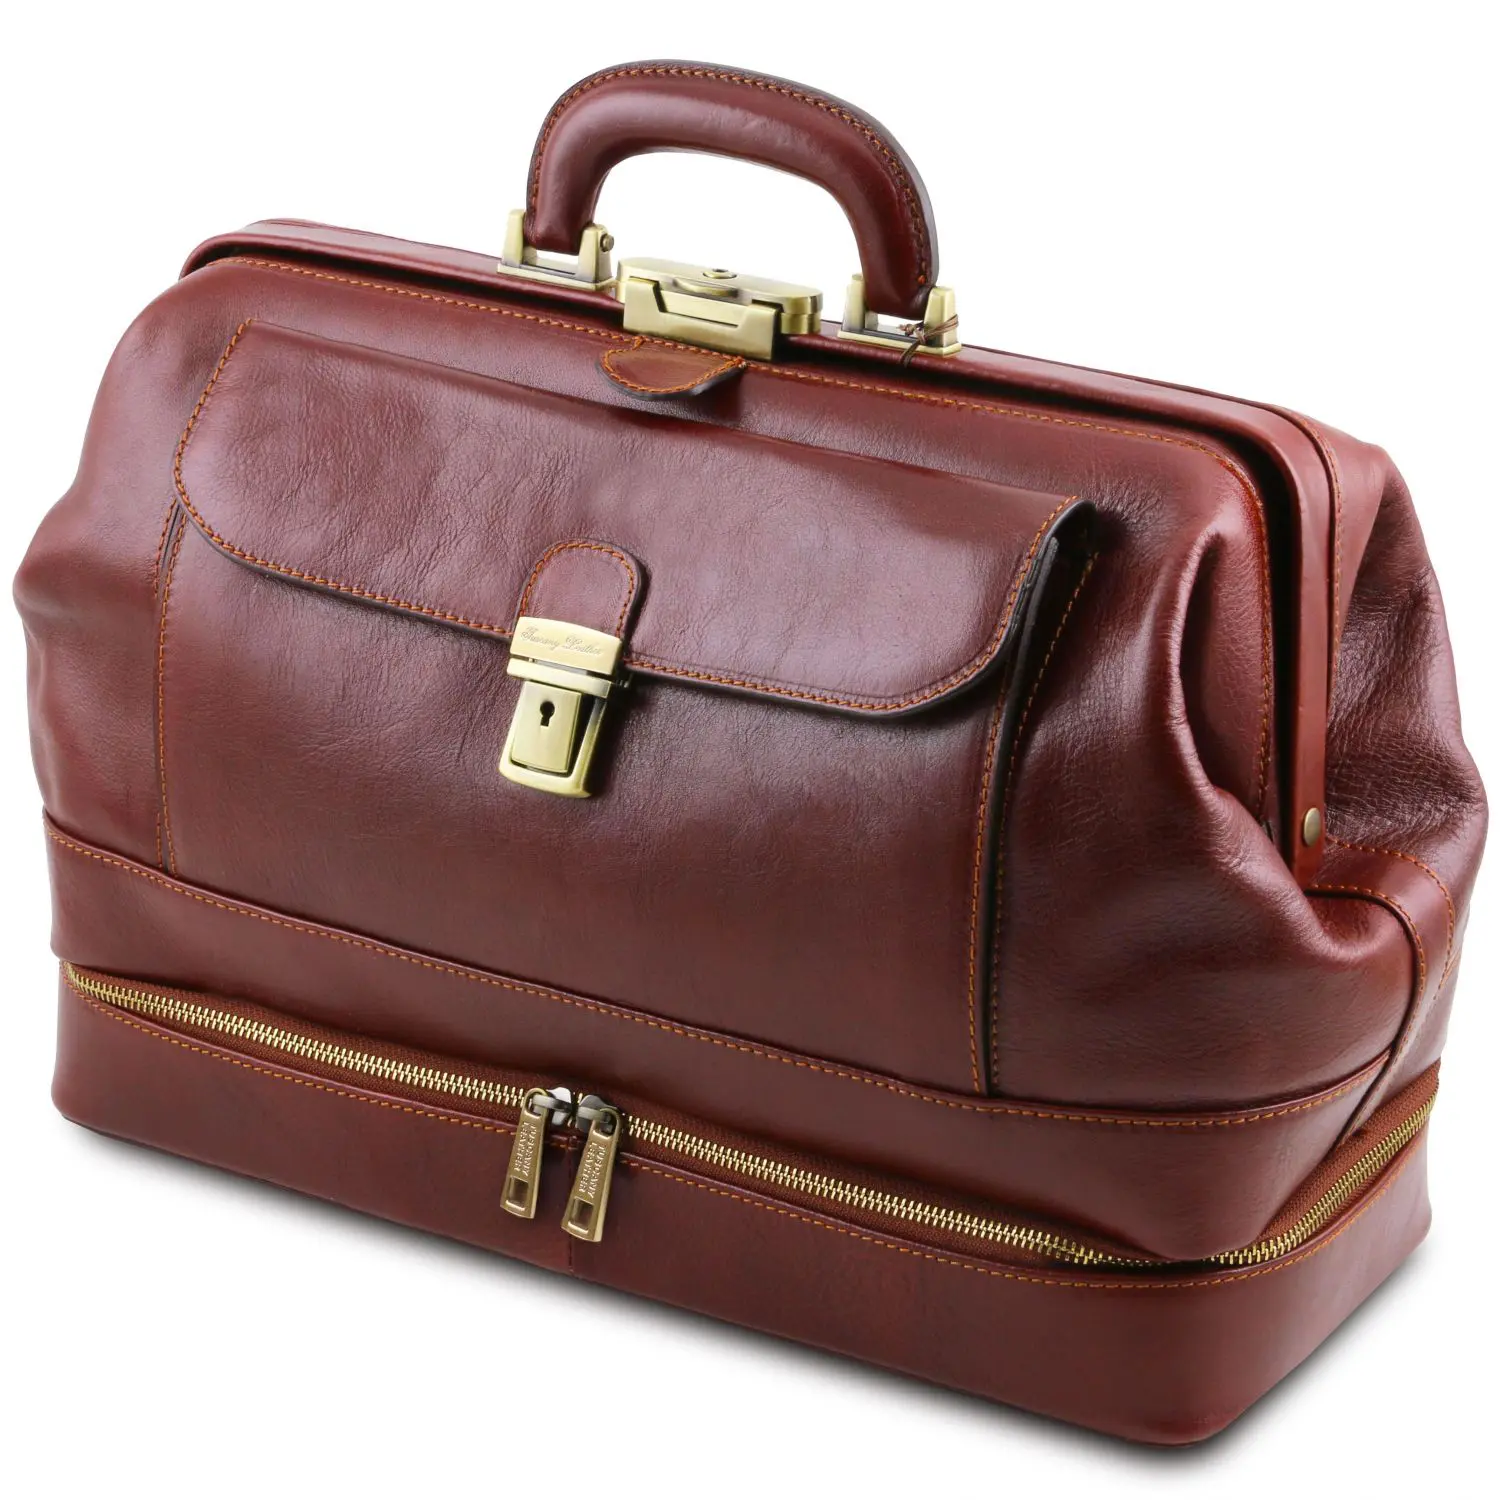 Tangent faction] The most cinematic horizontal doctor bag - Shop TANGENT  LINEAR Briefcases & Doctor Bags - Pinkoi